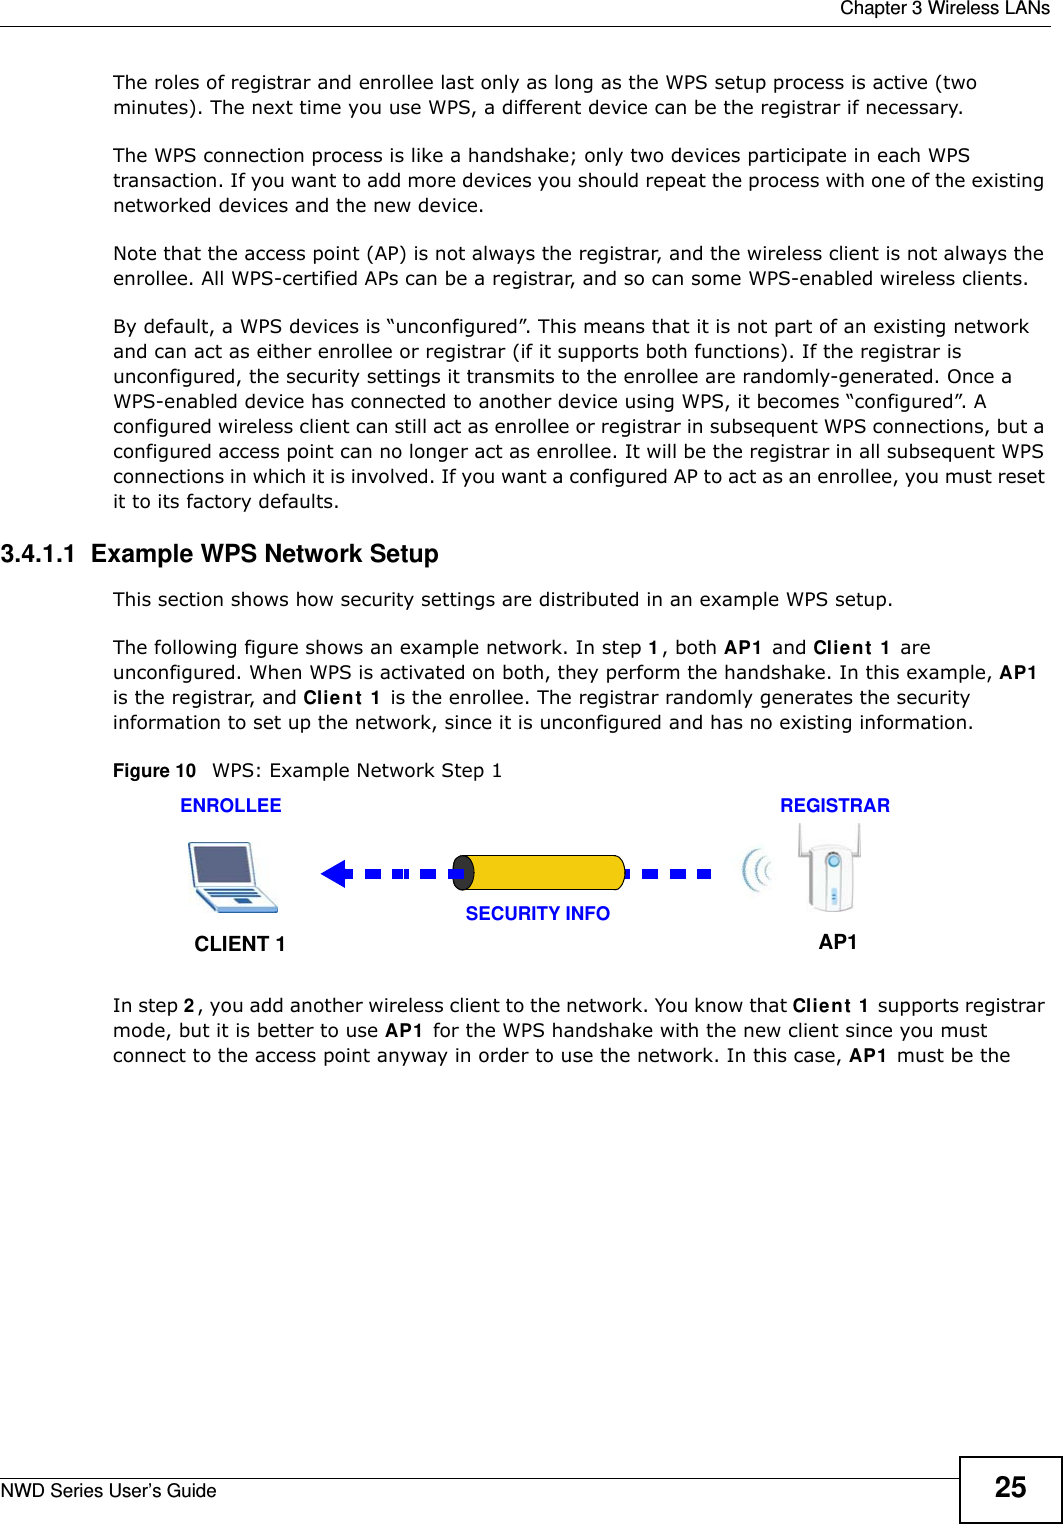  Chapter 3 Wireless LANsNWD Series User’s Guide 25The roles of registrar and enrollee last only as long as the WPS setup process is active (two minutes). The next time you use WPS, a different device can be the registrar if necessary.The WPS connection process is like a handshake; only two devices participate in each WPS transaction. If you want to add more devices you should repeat the process with one of the existing networked devices and the new device.Note that the access point (AP) is not always the registrar, and the wireless client is not always the enrollee. All WPS-certified APs can be a registrar, and so can some WPS-enabled wireless clients.By default, a WPS devices is “unconfigured”. This means that it is not part of an existing network and can act as either enrollee or registrar (if it supports both functions). If the registrar is unconfigured, the security settings it transmits to the enrollee are randomly-generated. Once a WPS-enabled device has connected to another device using WPS, it becomes “configured”. A configured wireless client can still act as enrollee or registrar in subsequent WPS connections, but a configured access point can no longer act as enrollee. It will be the registrar in all subsequent WPS connections in which it is involved. If you want a configured AP to act as an enrollee, you must reset it to its factory defaults.3.4.1.1  Example WPS Network SetupThis section shows how security settings are distributed in an example WPS setup.The following figure shows an example network. In step 1, both AP1 and Client 1 are unconfigured. When WPS is activated on both, they perform the handshake. In this example, AP1 is the registrar, and Client 1 is the enrollee. The registrar randomly generates the security information to set up the network, since it is unconfigured and has no existing information.Figure 10   WPS: Example Network Step 1In step 2, you add another wireless client to the network. You know that Client 1 supports registrar mode, but it is better to use AP1 for the WPS handshake with the new client since you must connect to the access point anyway in order to use the network. In this case, AP1 must be the REGISTRARENROLLEESECURITY INFOCLIENT 1 AP1